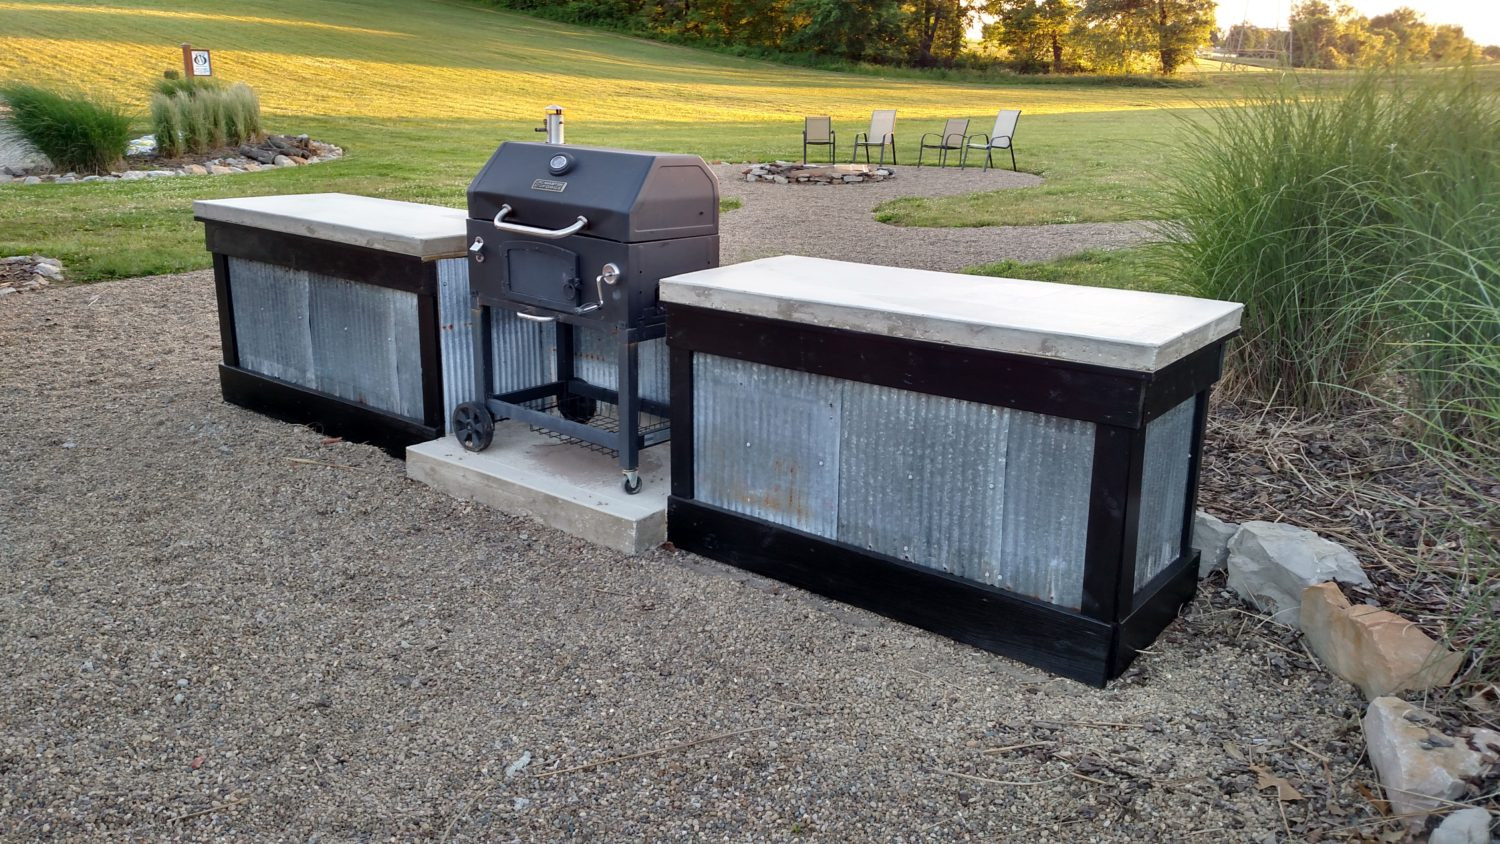 Inexpensive Outdoor Kitchen
 Creating An Inexpensive Outdoor Kitchen With Concrete